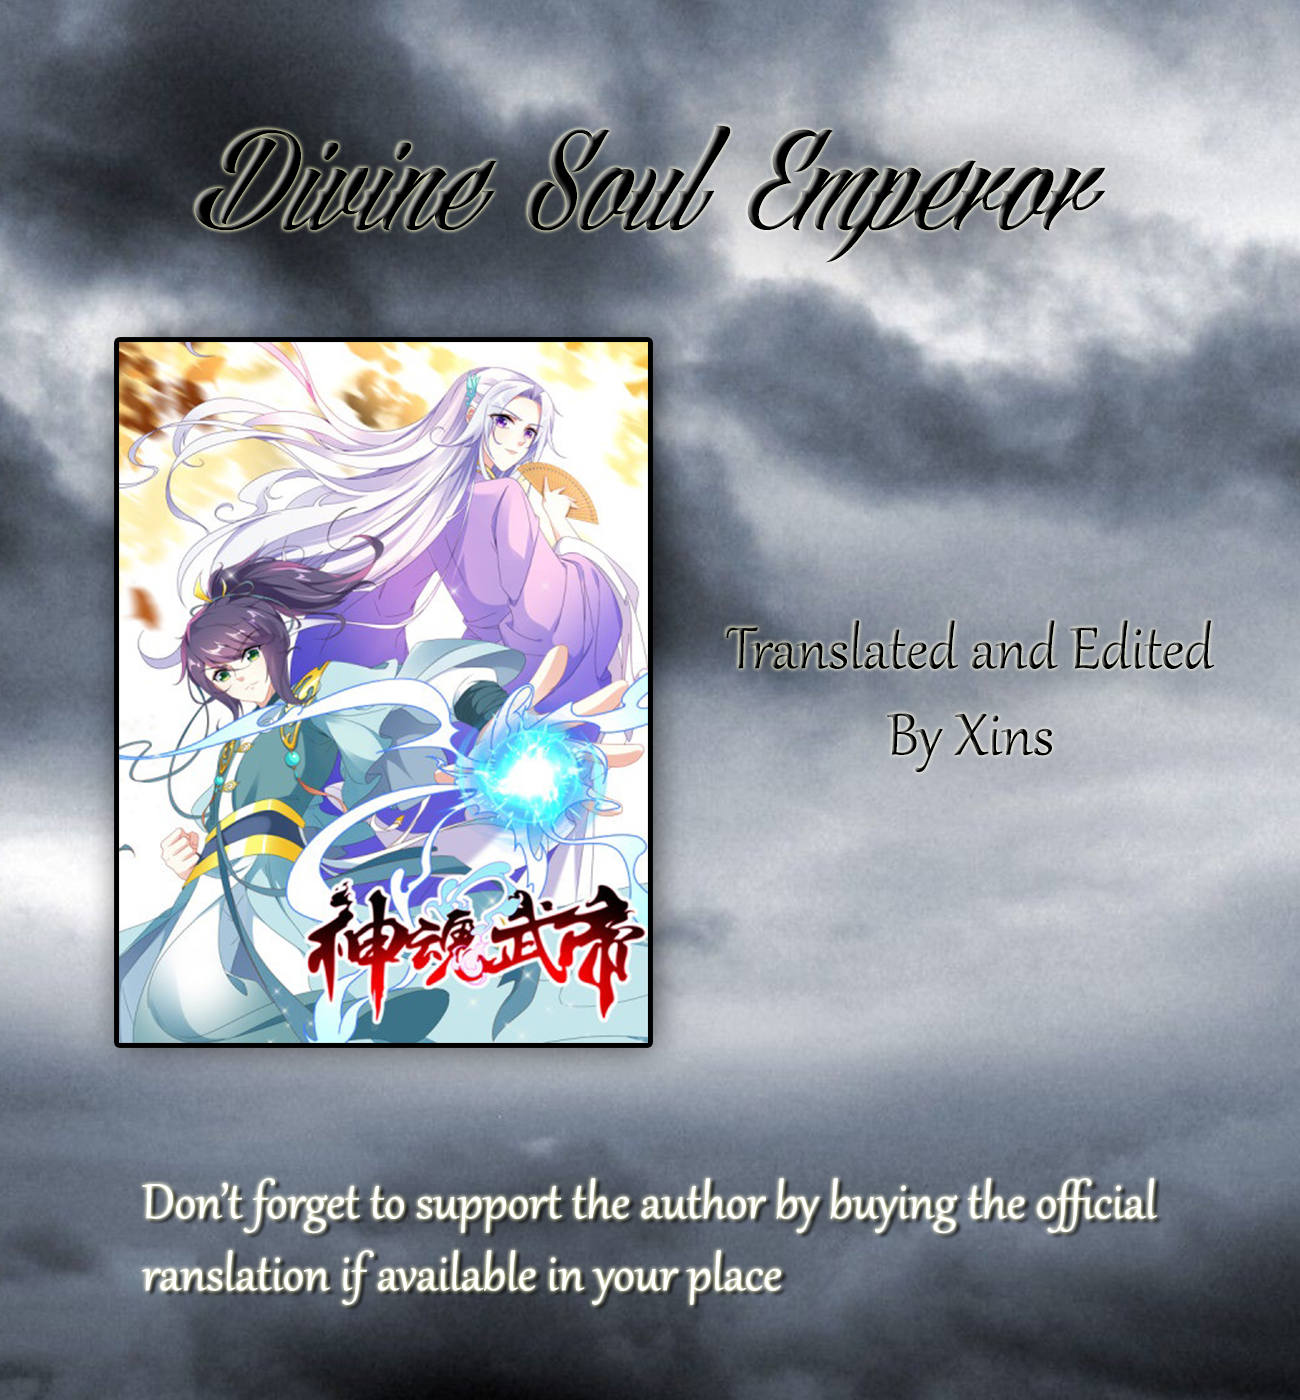 Divine Soul Emperor Ch. 14 Waste Soul is a Six Star Warrior?